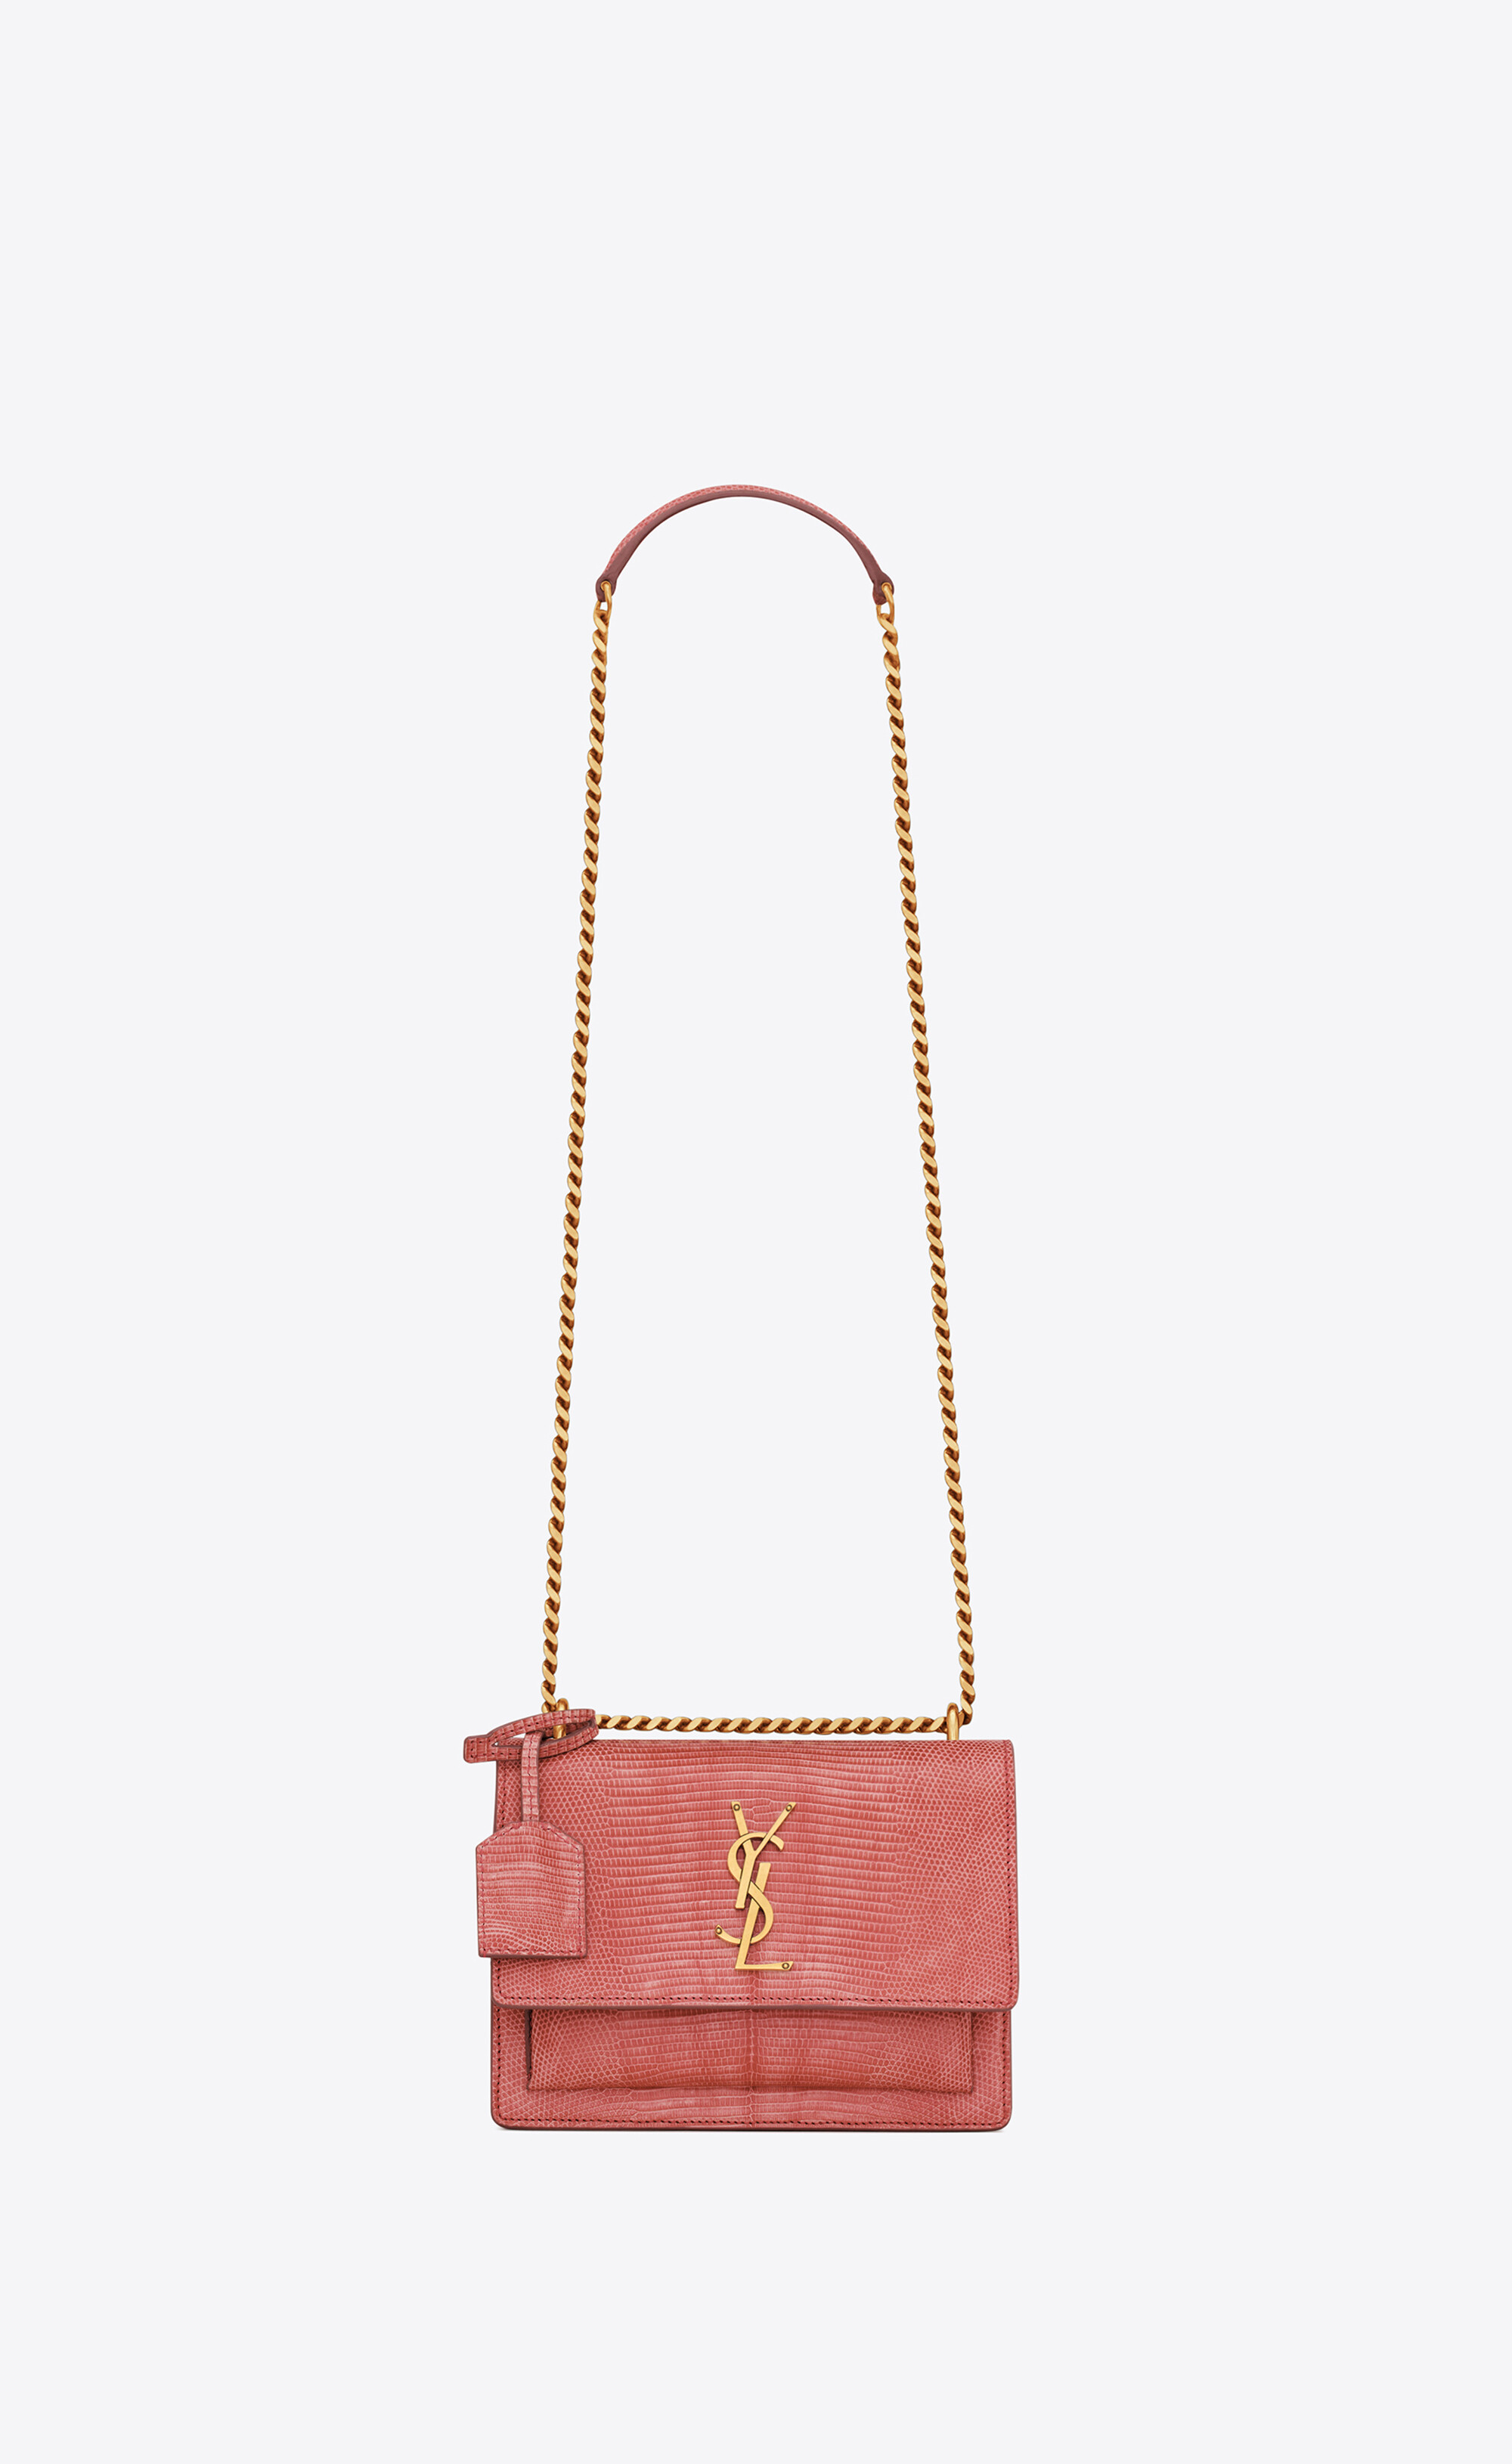 Saint Laurent Women's Sunset Small Chain Bag in Lizard - Toasted Brown